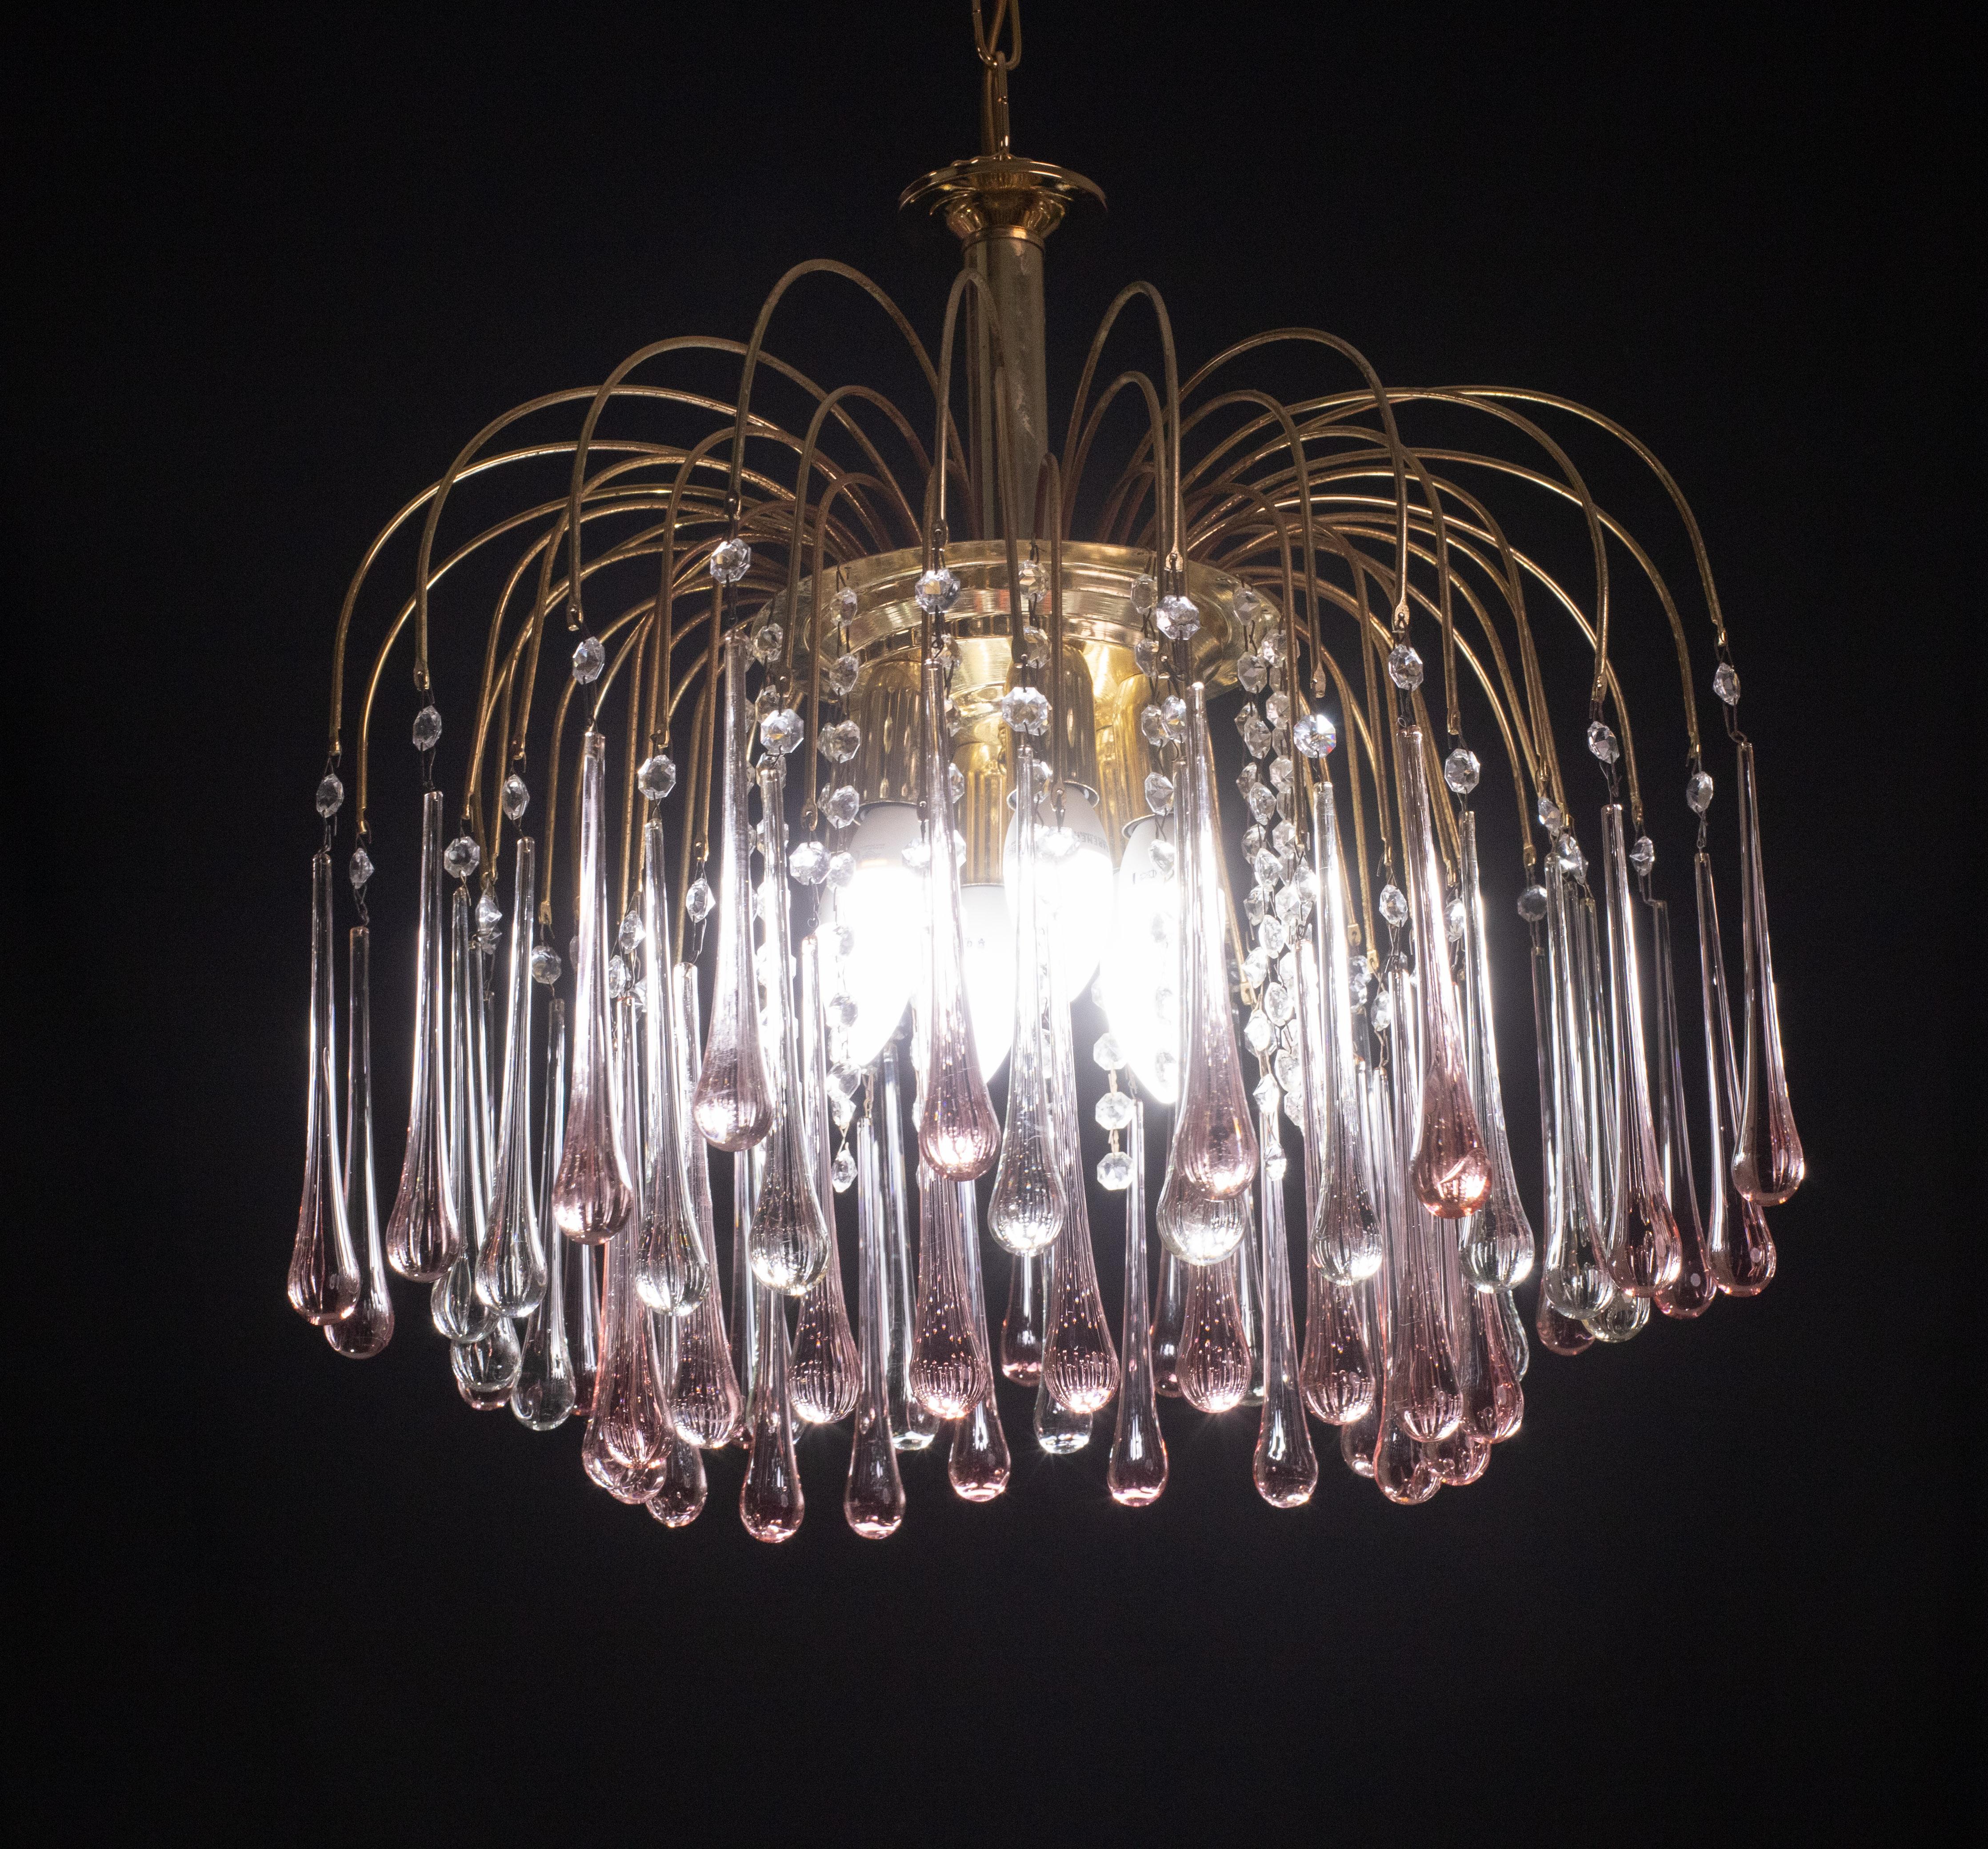 Lady Barbara, Murano Chandelier Pink and White Drops, Venini Style, 1970s For Sale 1